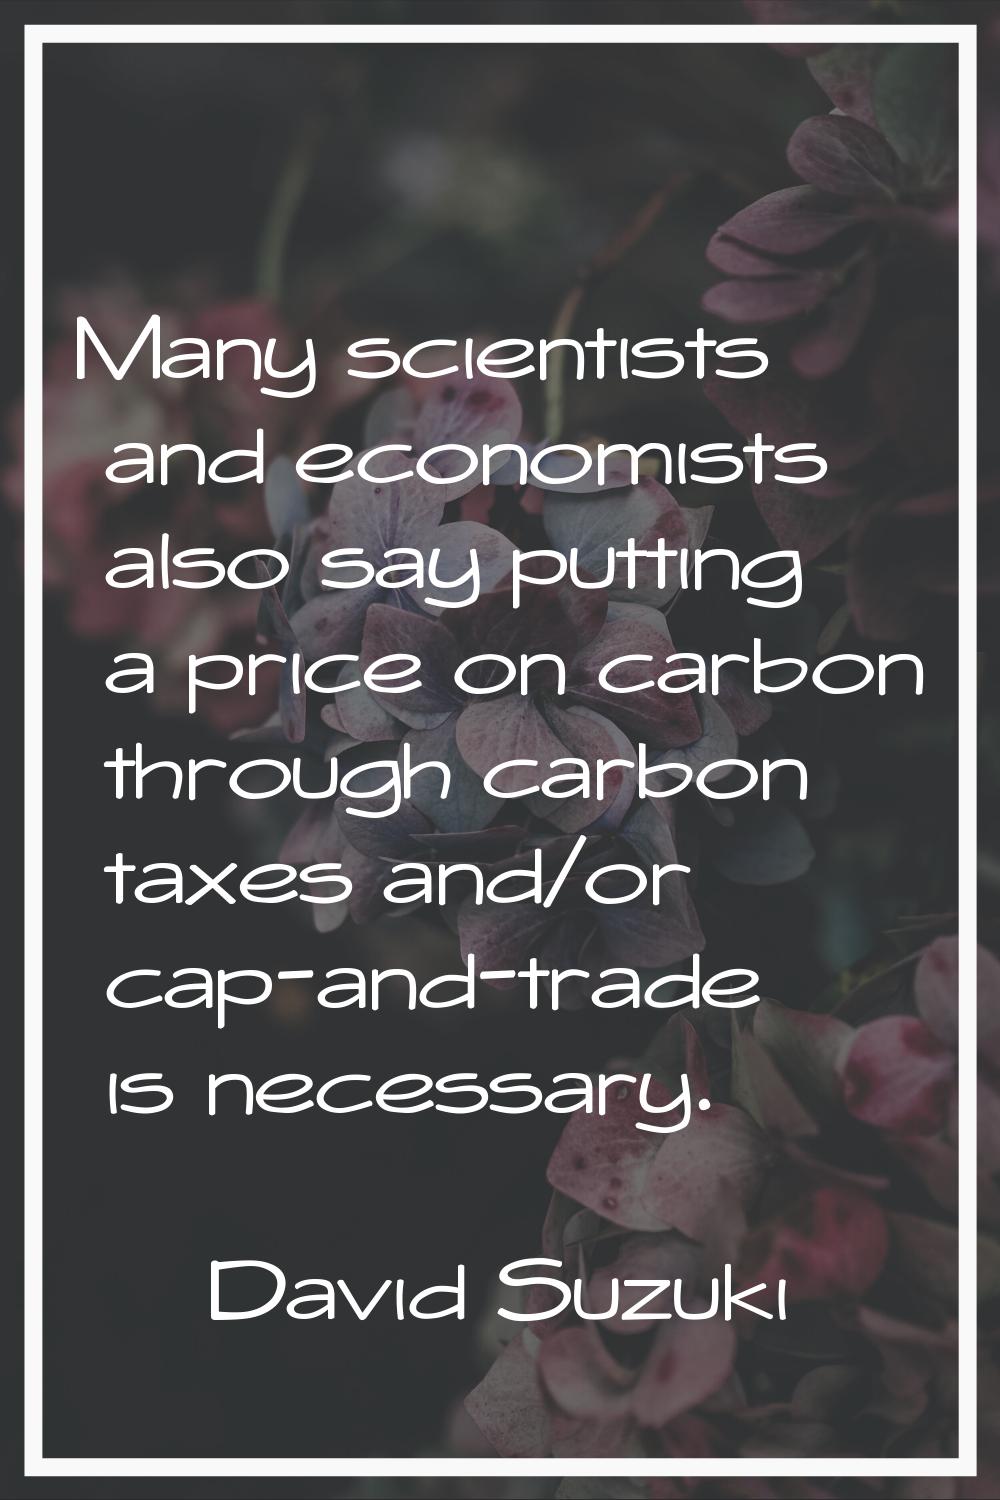 Many scientists and economists also say putting a price on carbon through carbon taxes and/or cap-a